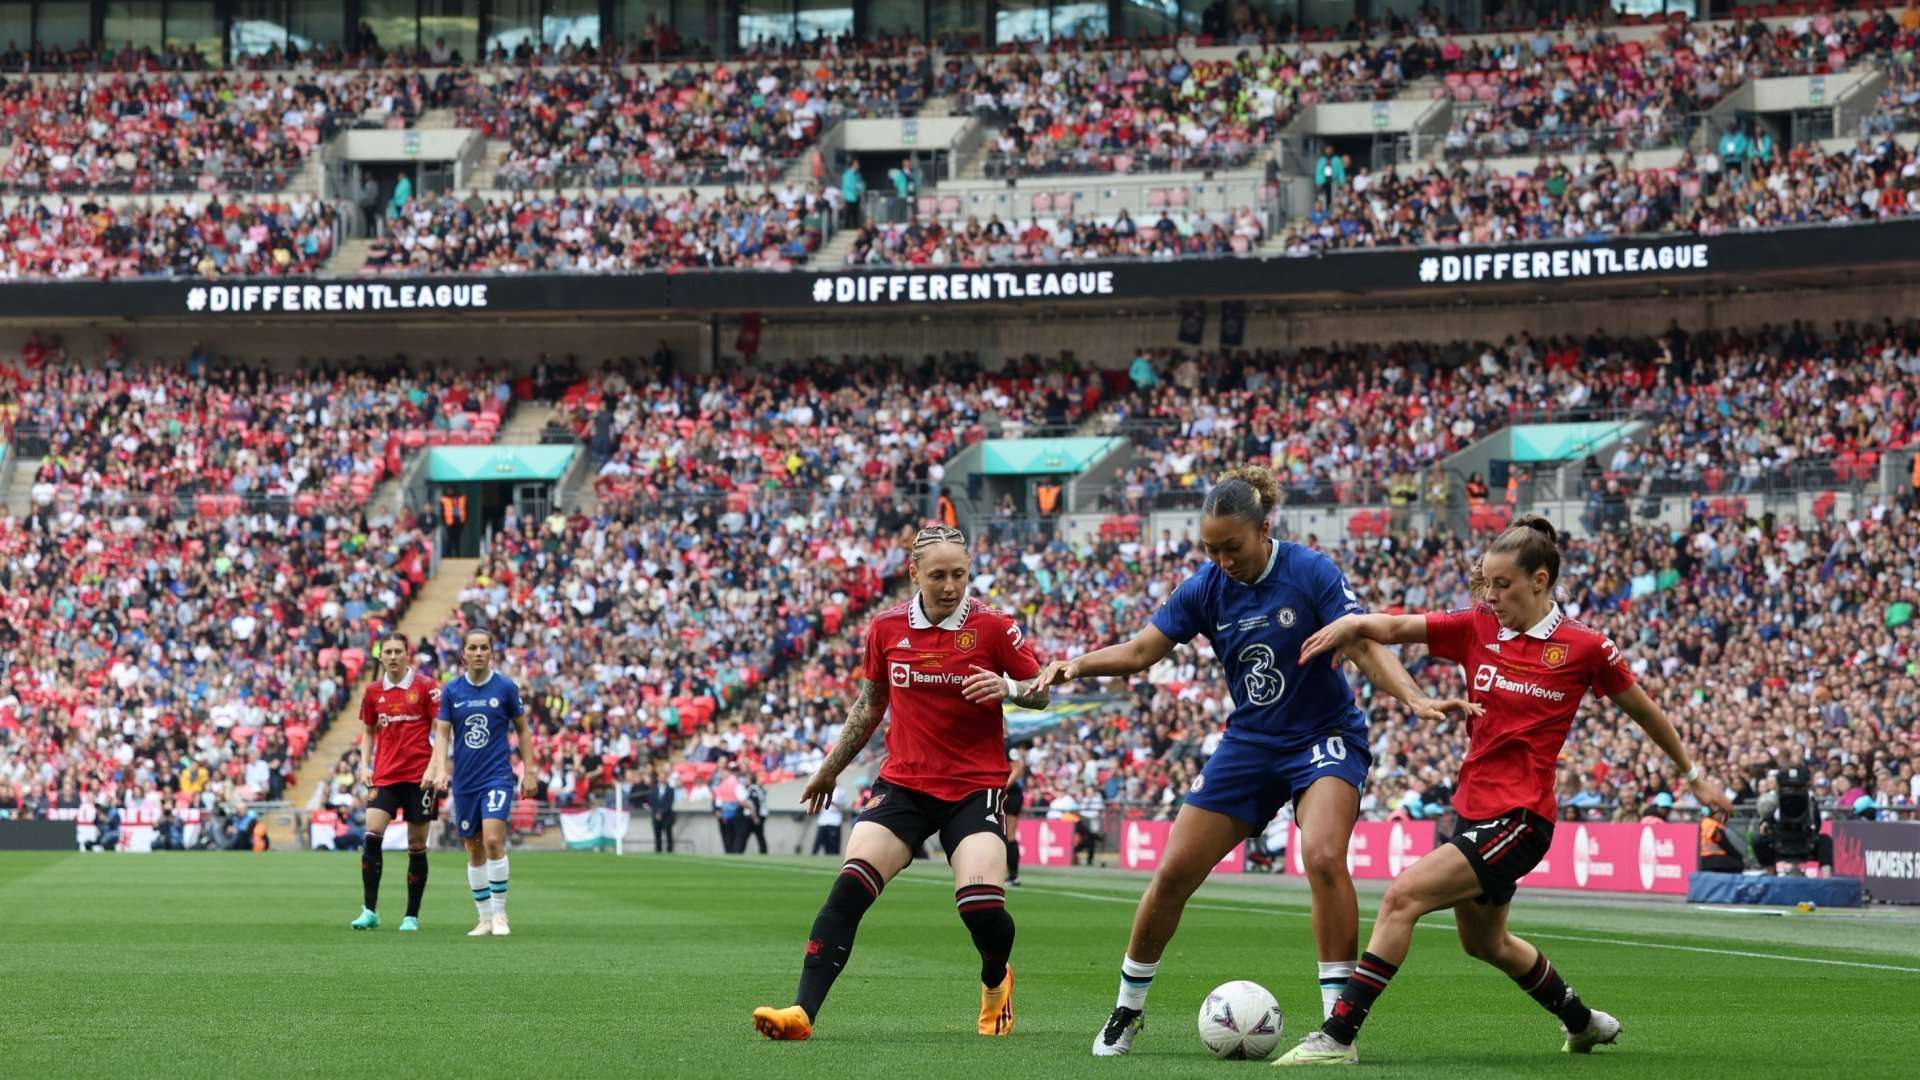 Chelsea Manchester United Women's FA Cup final 2022-23